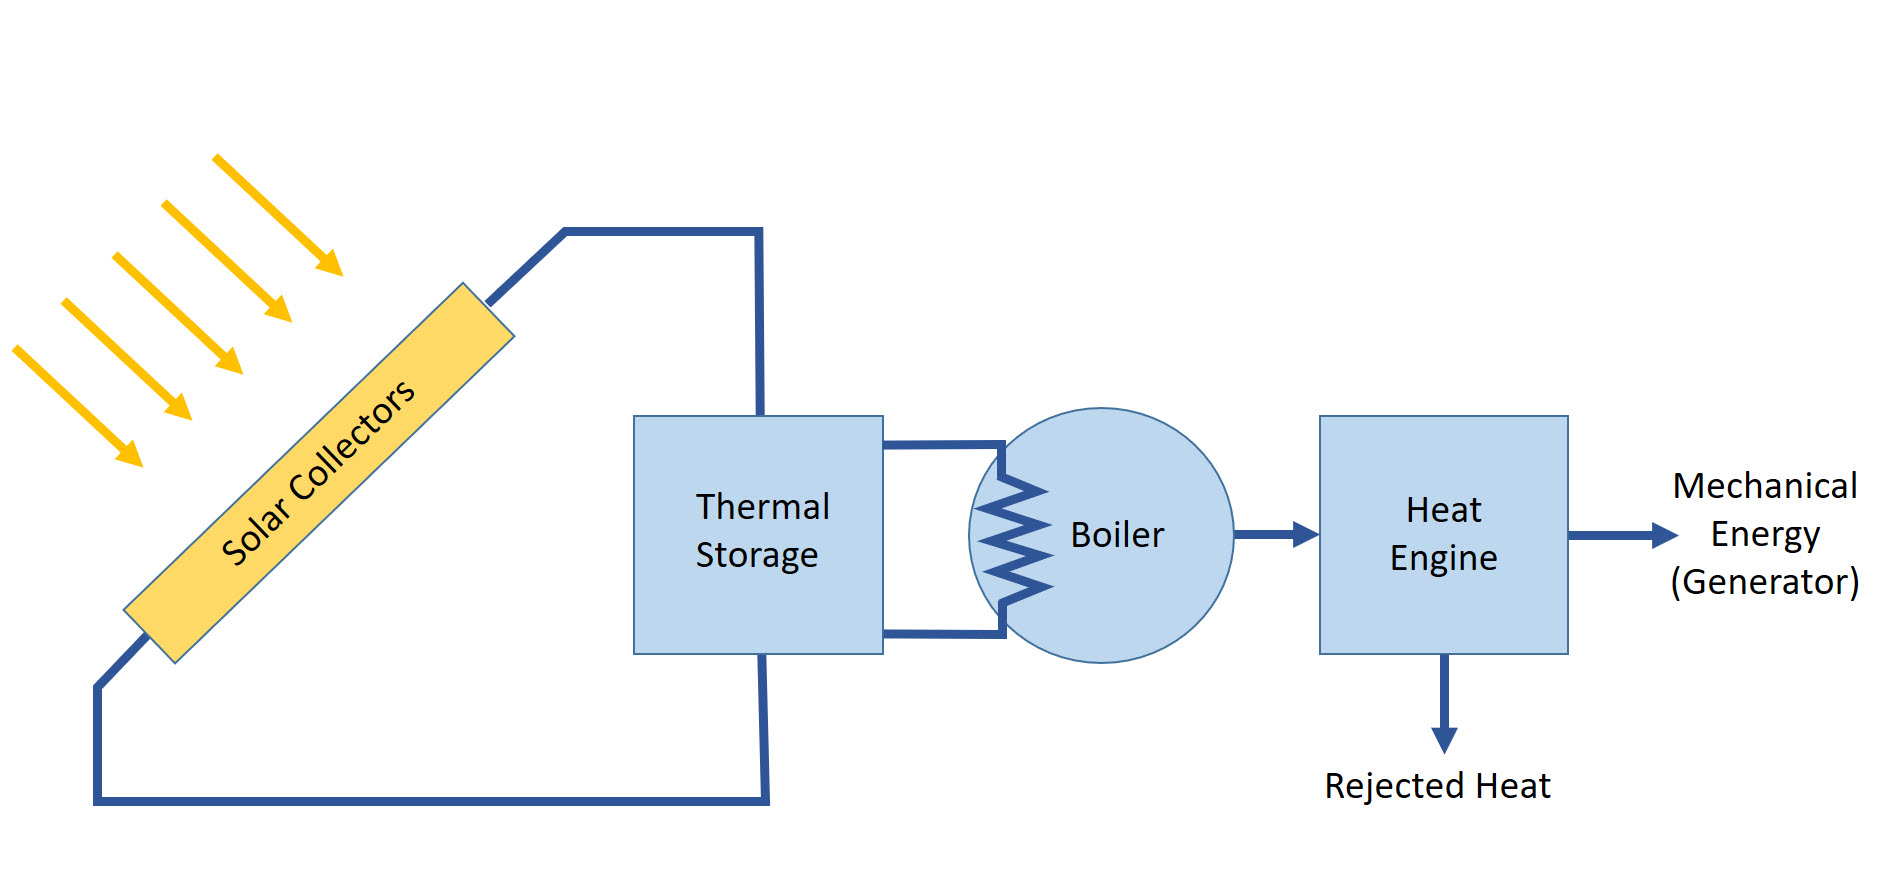 Solar energy conversion in CSP plants: solar heat is transferred to storage and further supplied to the boiler to generate steam. Then steam is supplied to the heat engine to generate mechanical work